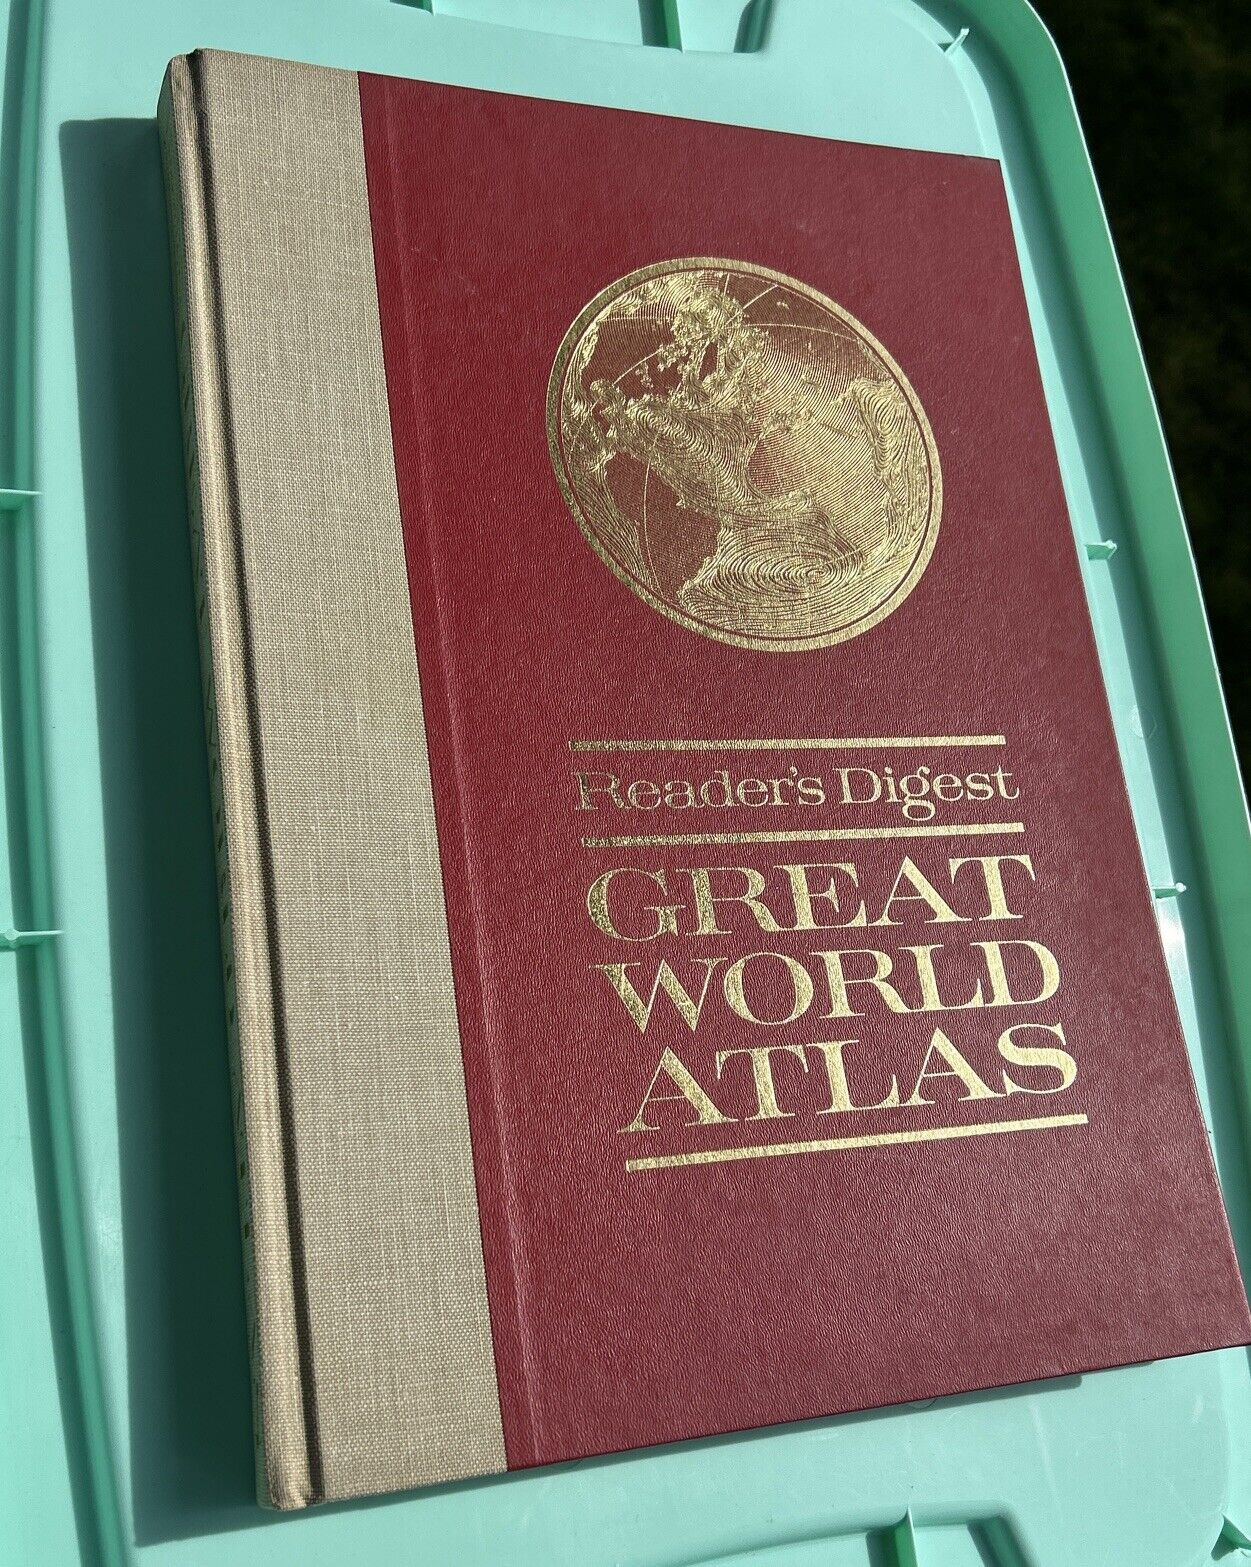 Vintage Reader's Digest Great World Atlas 1963 First Edition Hardcover World Map